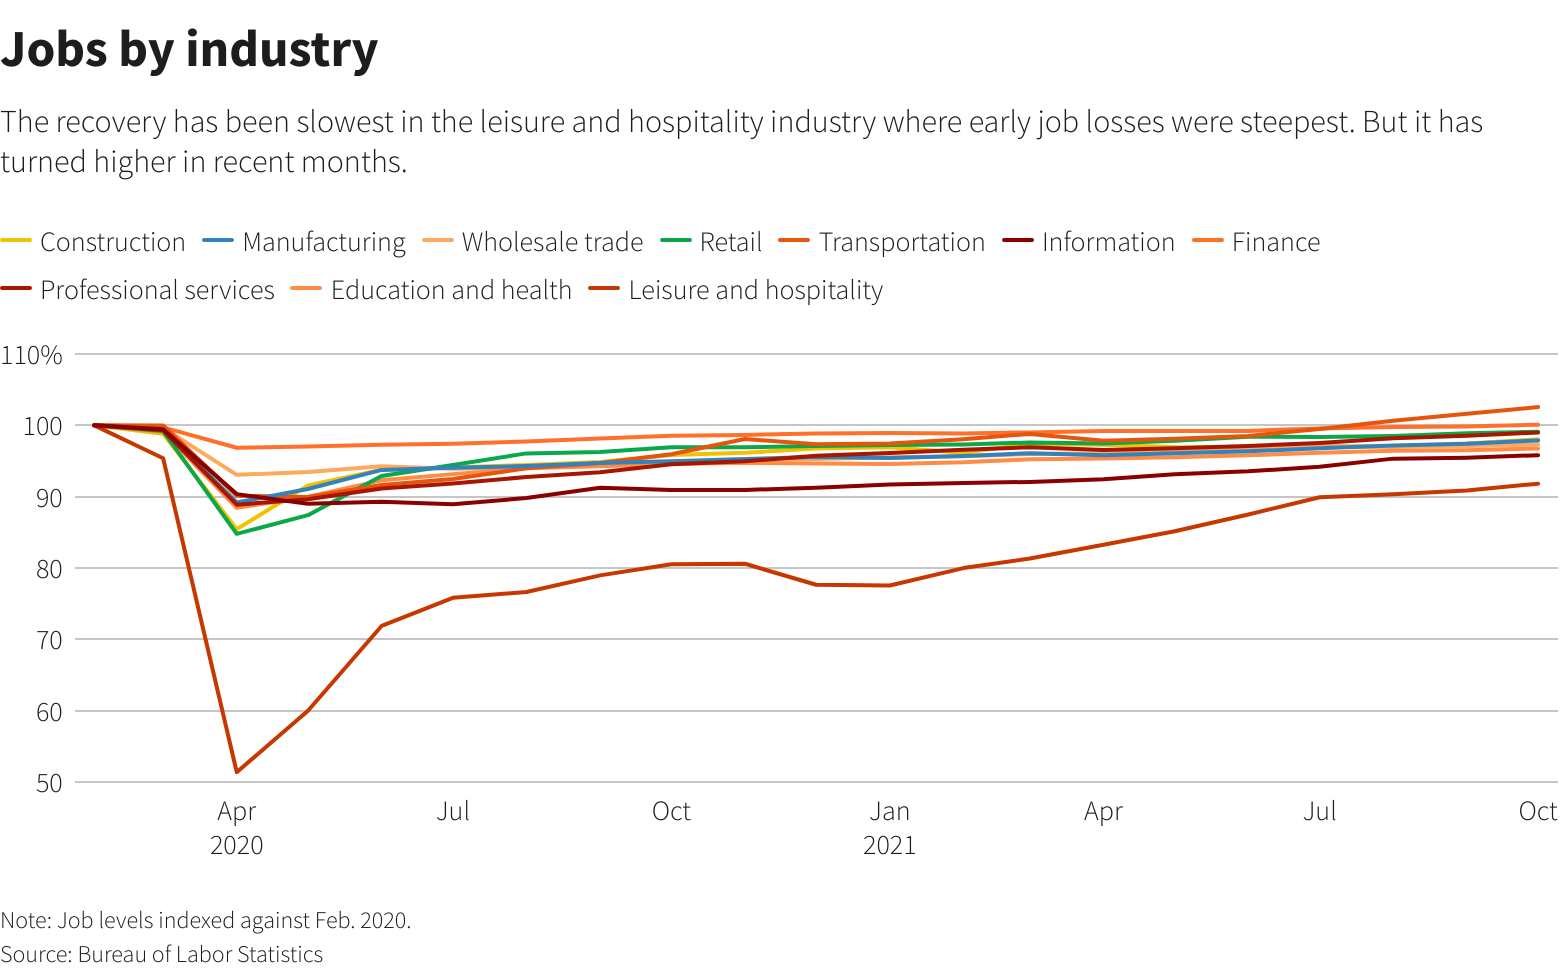 Jobs by industry Jobs by industry